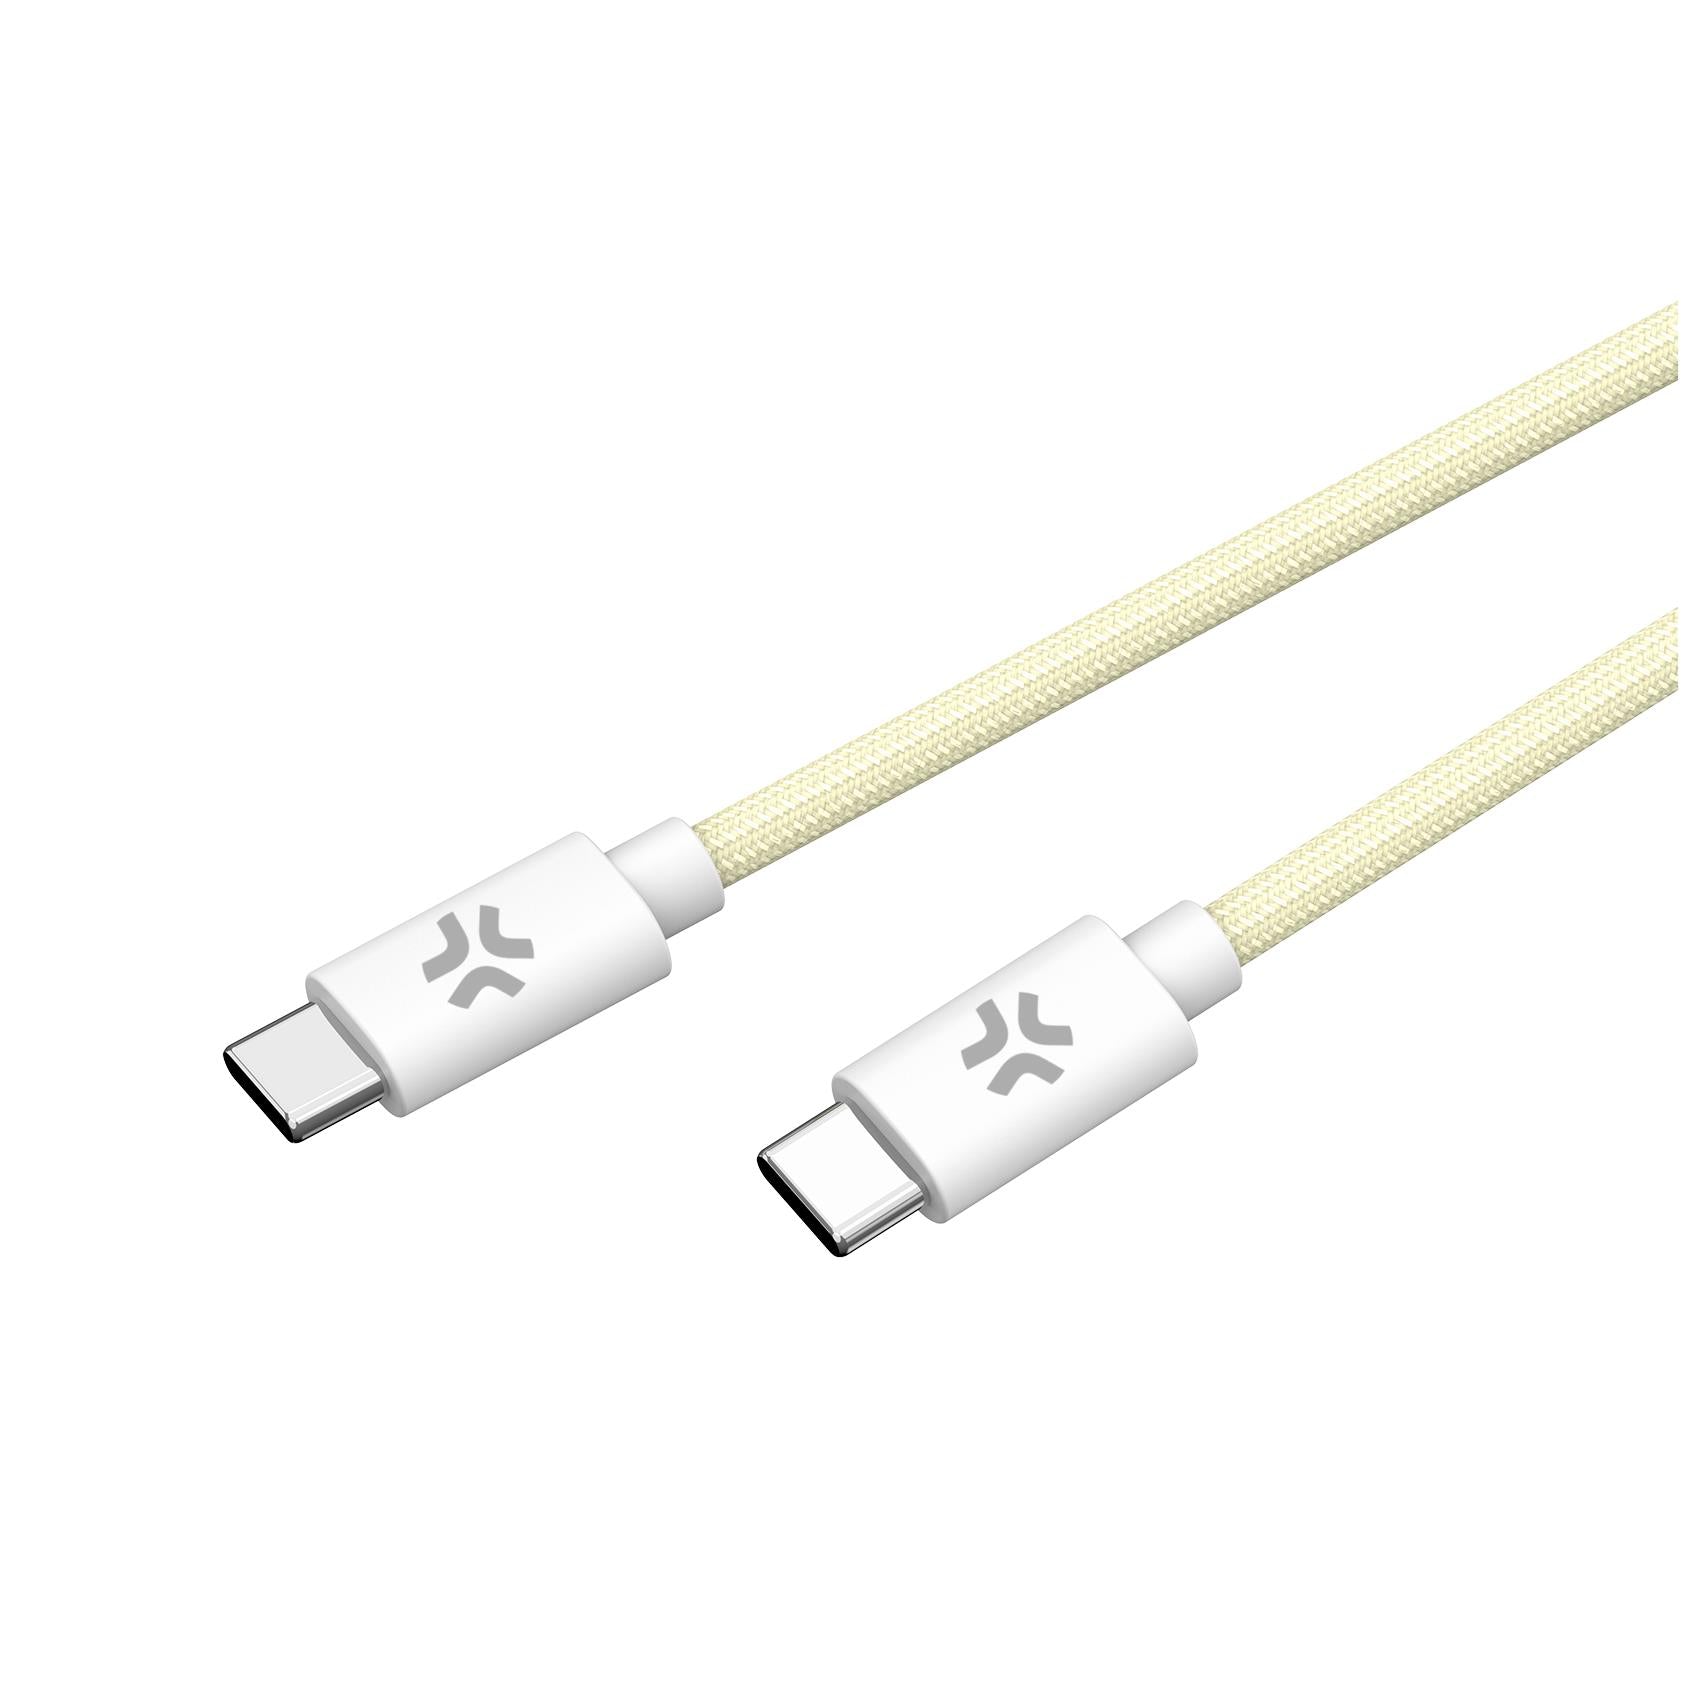 Celly USBCUSBCCOTT - USB-C to USB-C Cotton Braided Cable Yellow